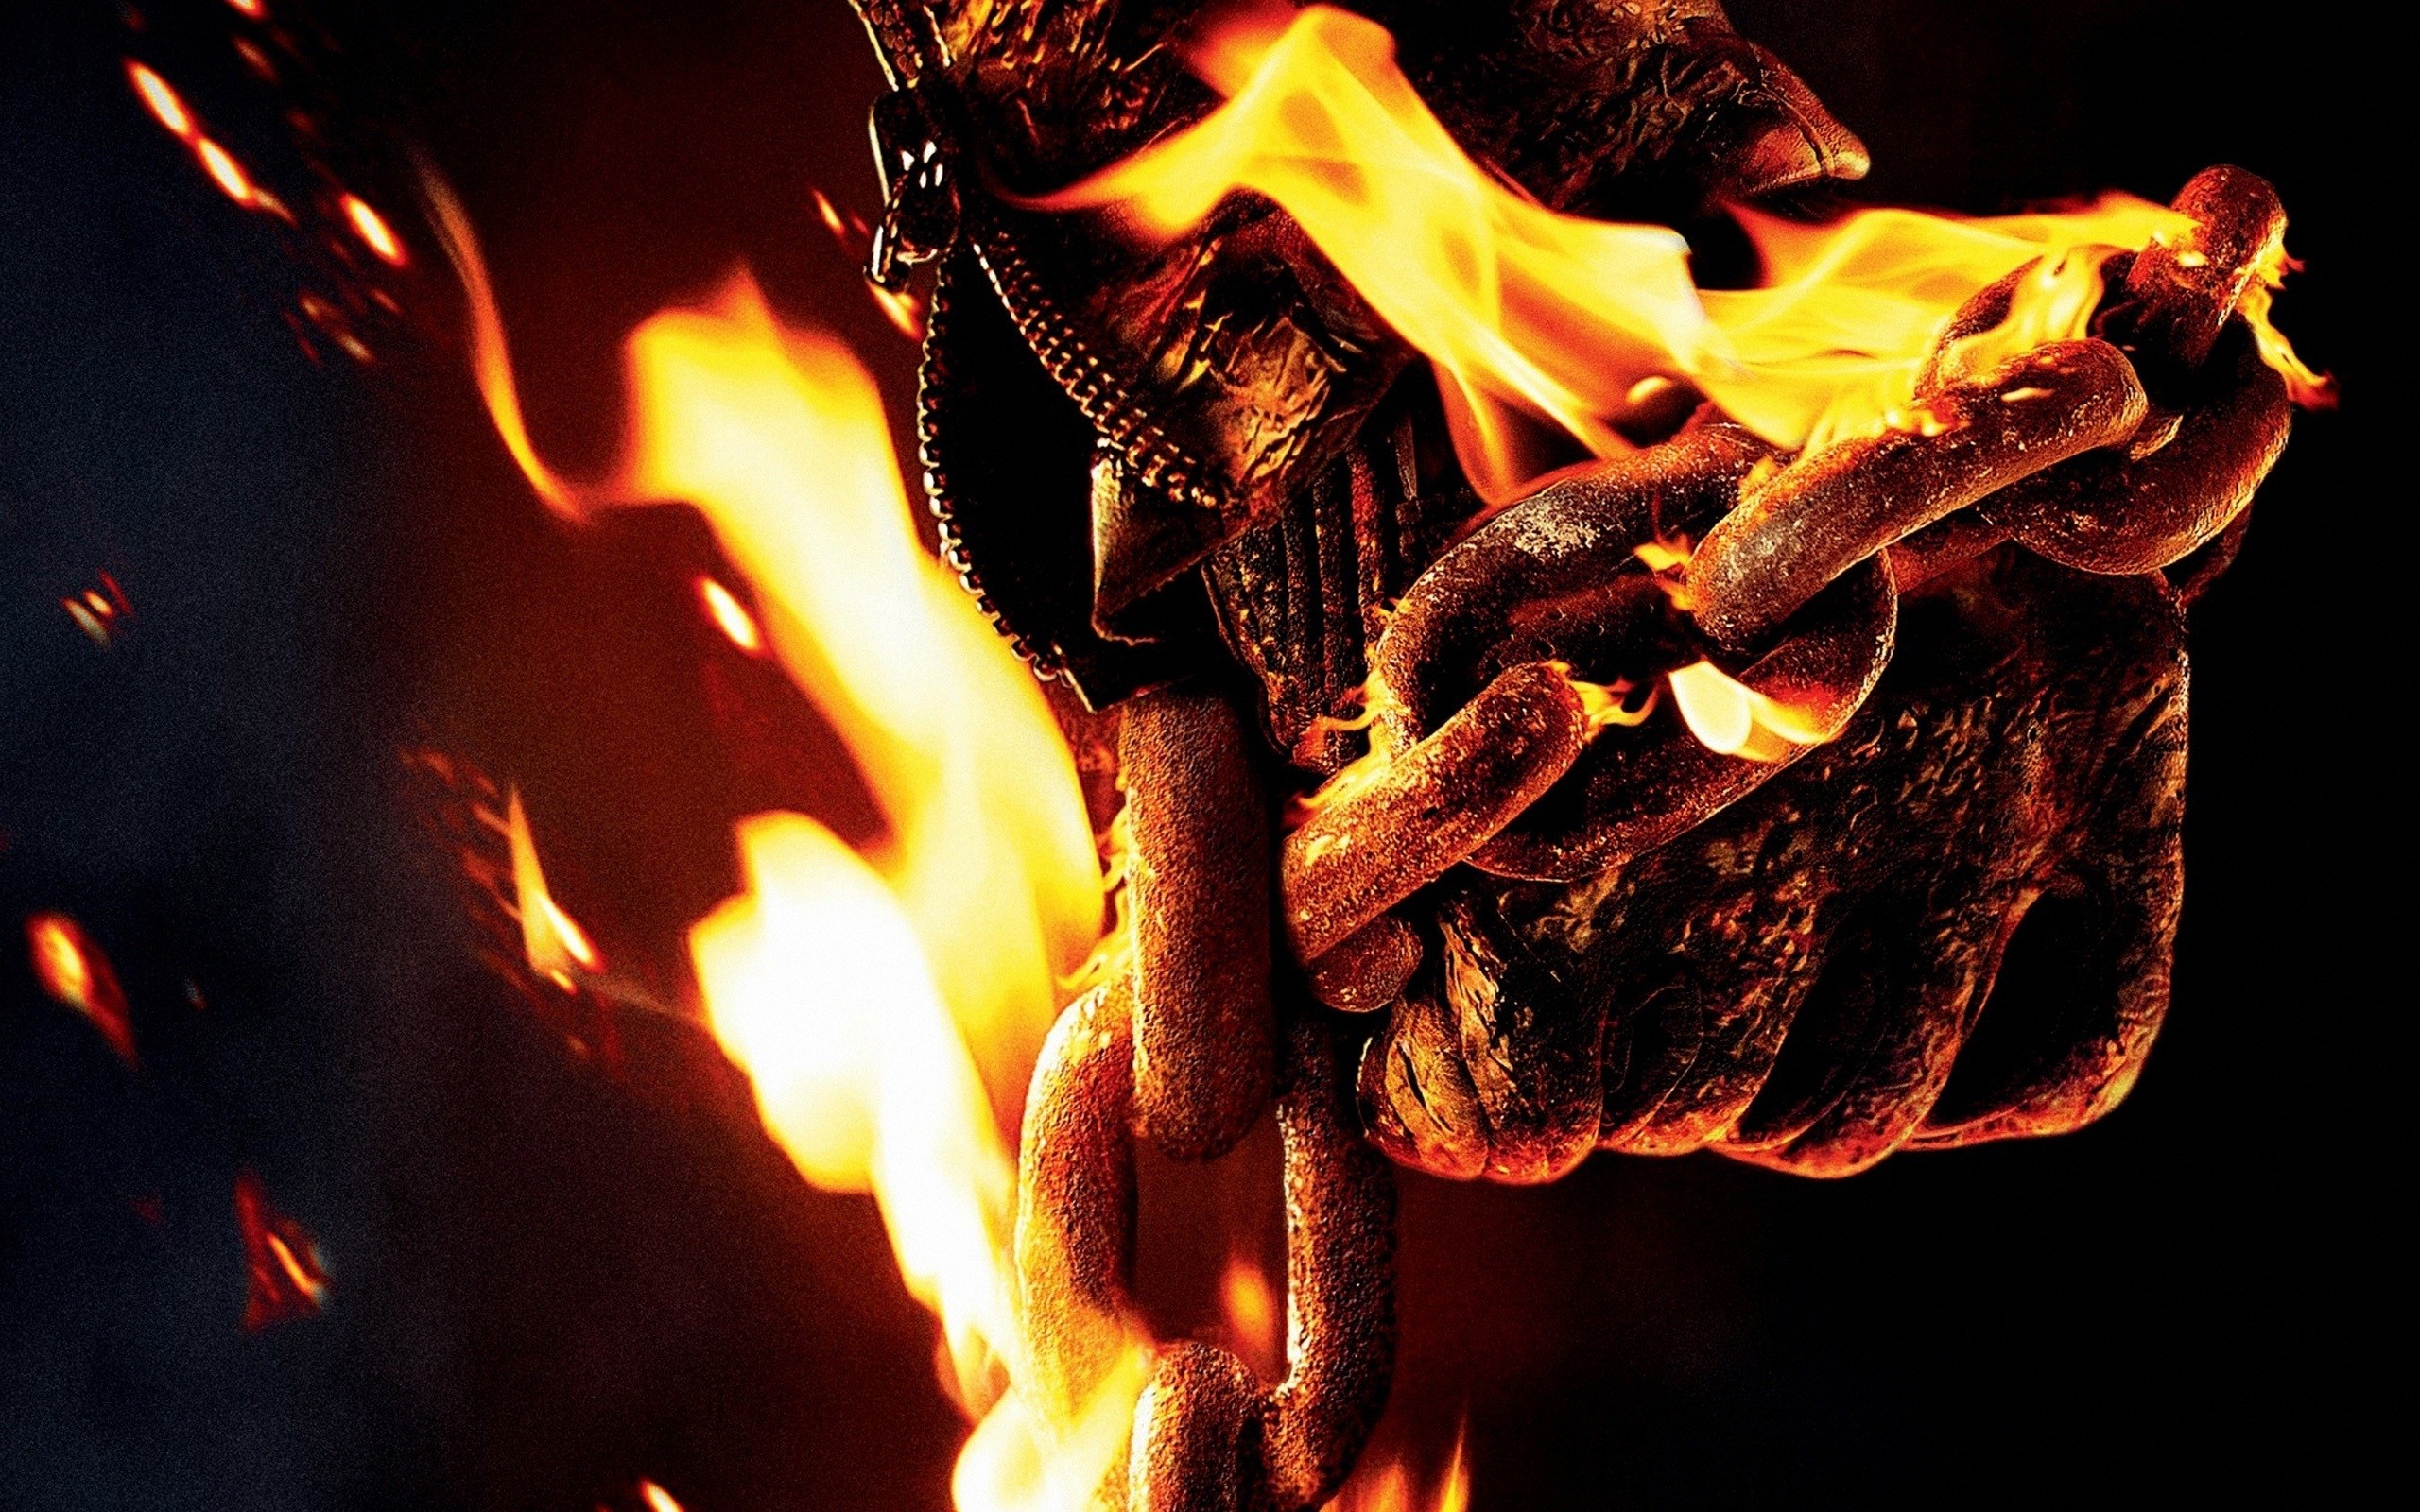 Of Ghost Rider HD Desktop Wallpaper And Image To